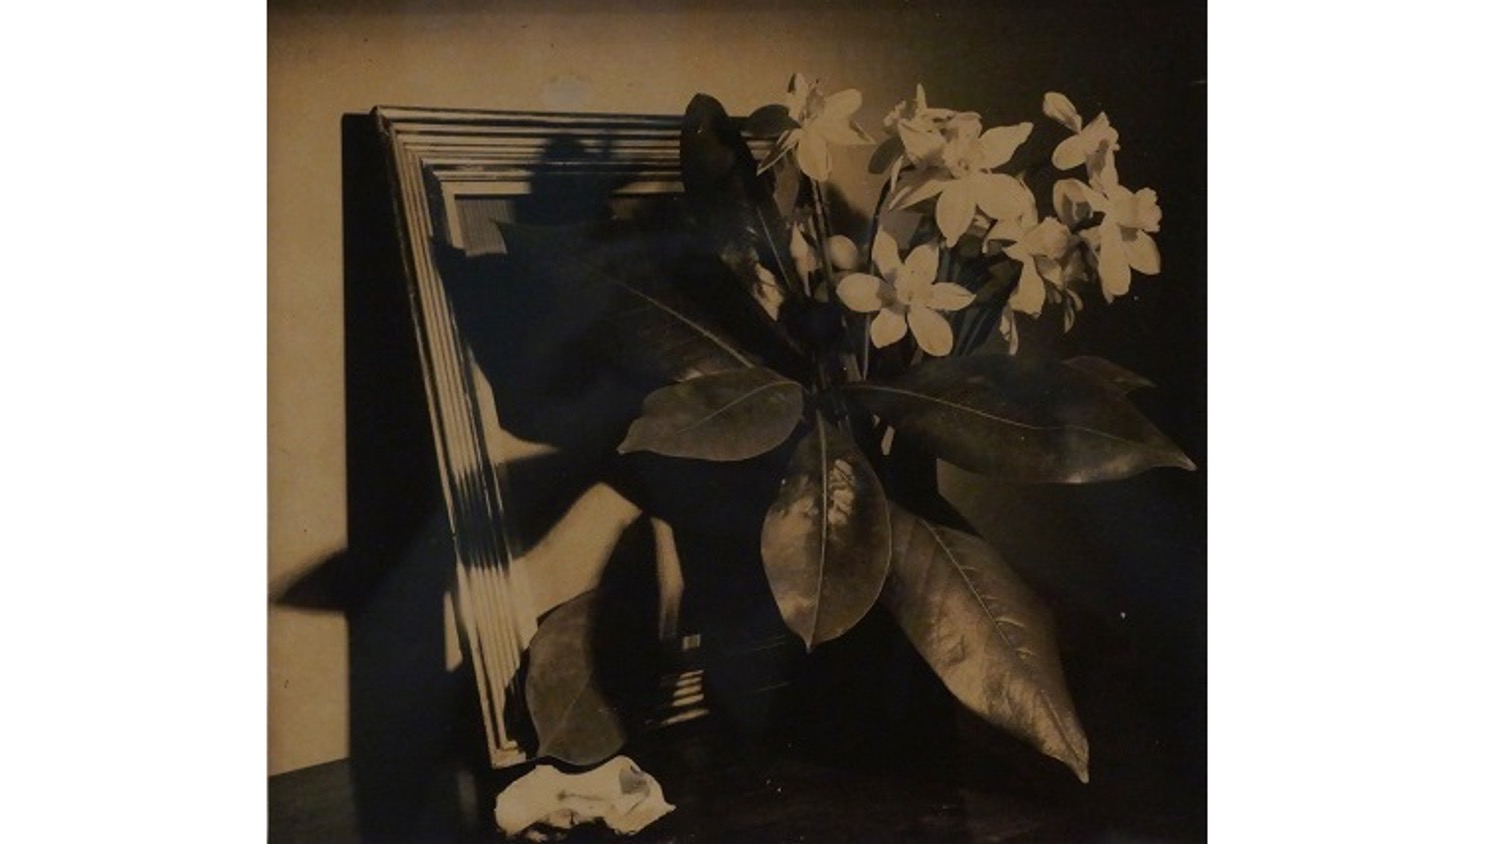 Horacio Coppola. Argentinean photographer and filmmaker 1906-2012, member of the Bauhaus.  "Flores- Ramos Mejía", 1940. Vintage photography. 23,5 x 25,5 cm.